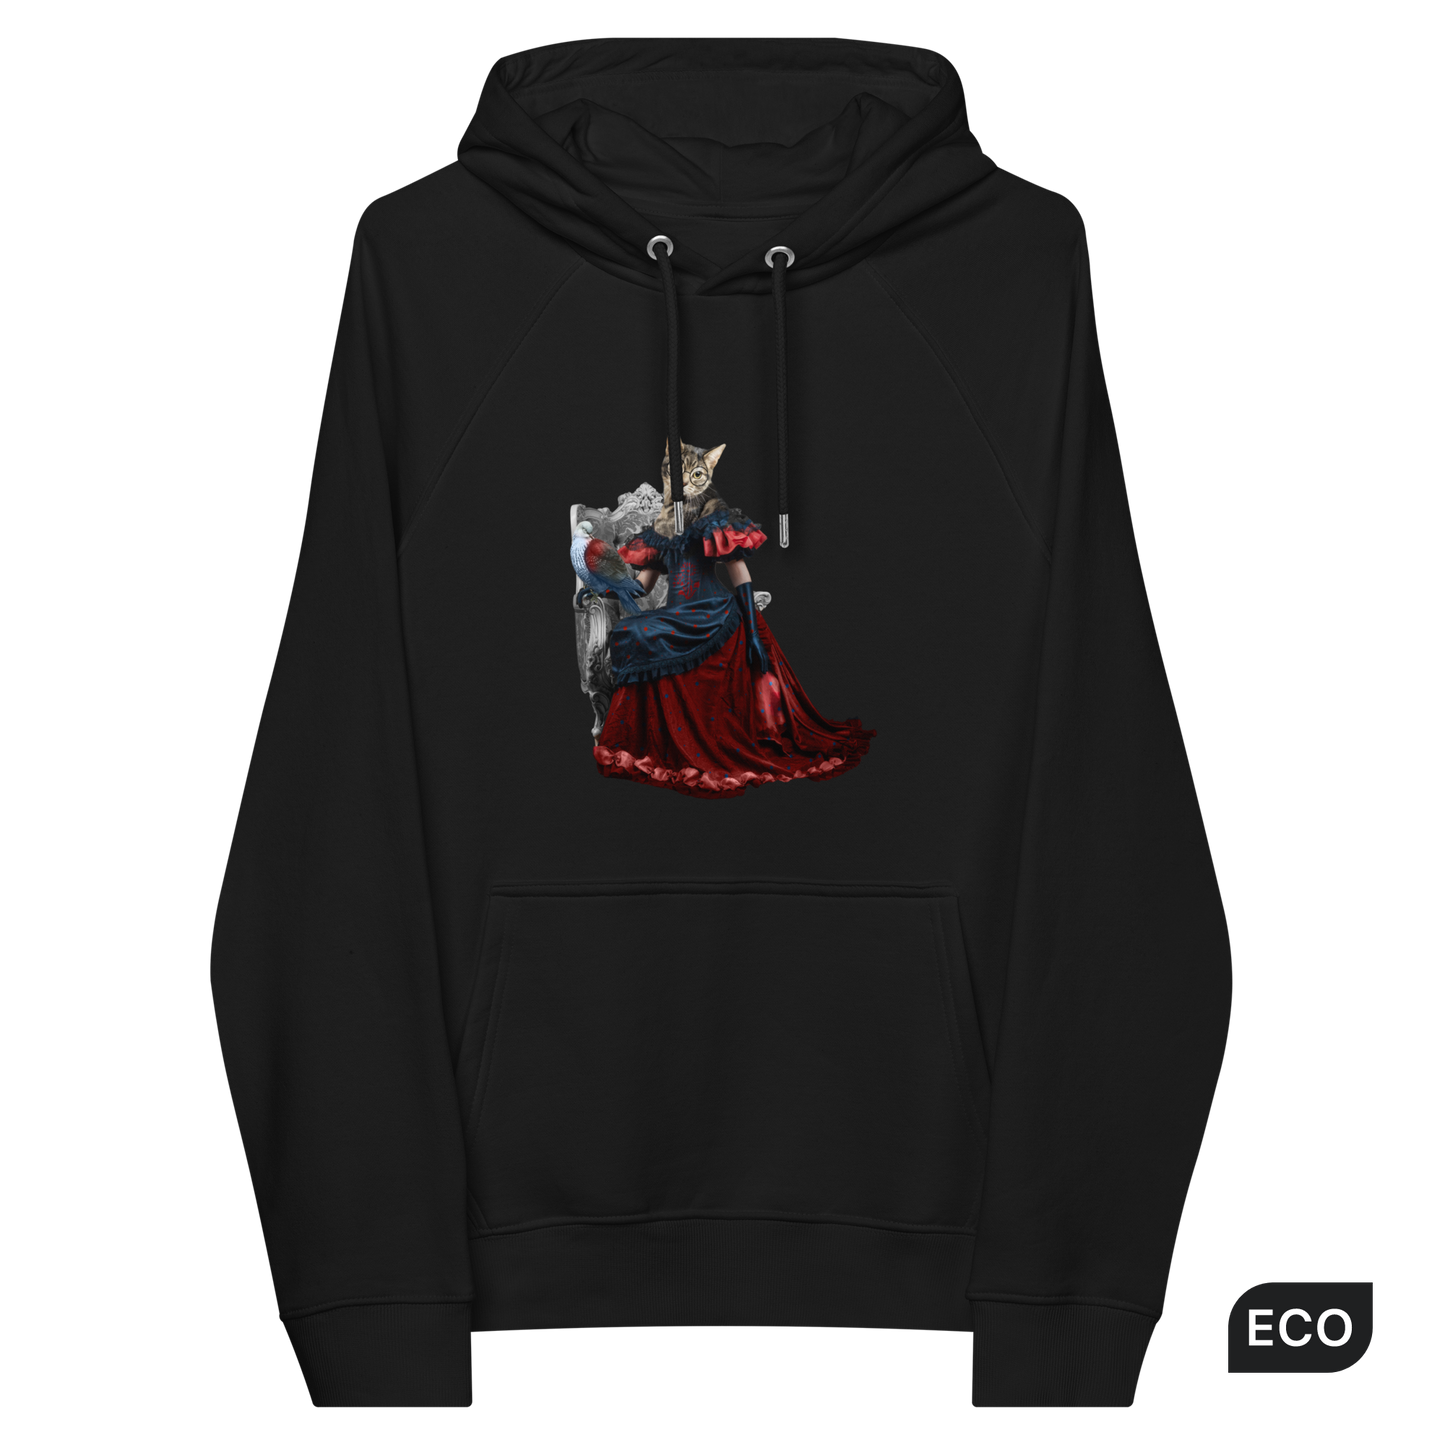 Black Anthropomorphic Cat Raglan Hoodie featuring an adorable Anthropomorphic Cat graphic on the chest - Cute Graphic Cat Hoodies - Boozy Fox